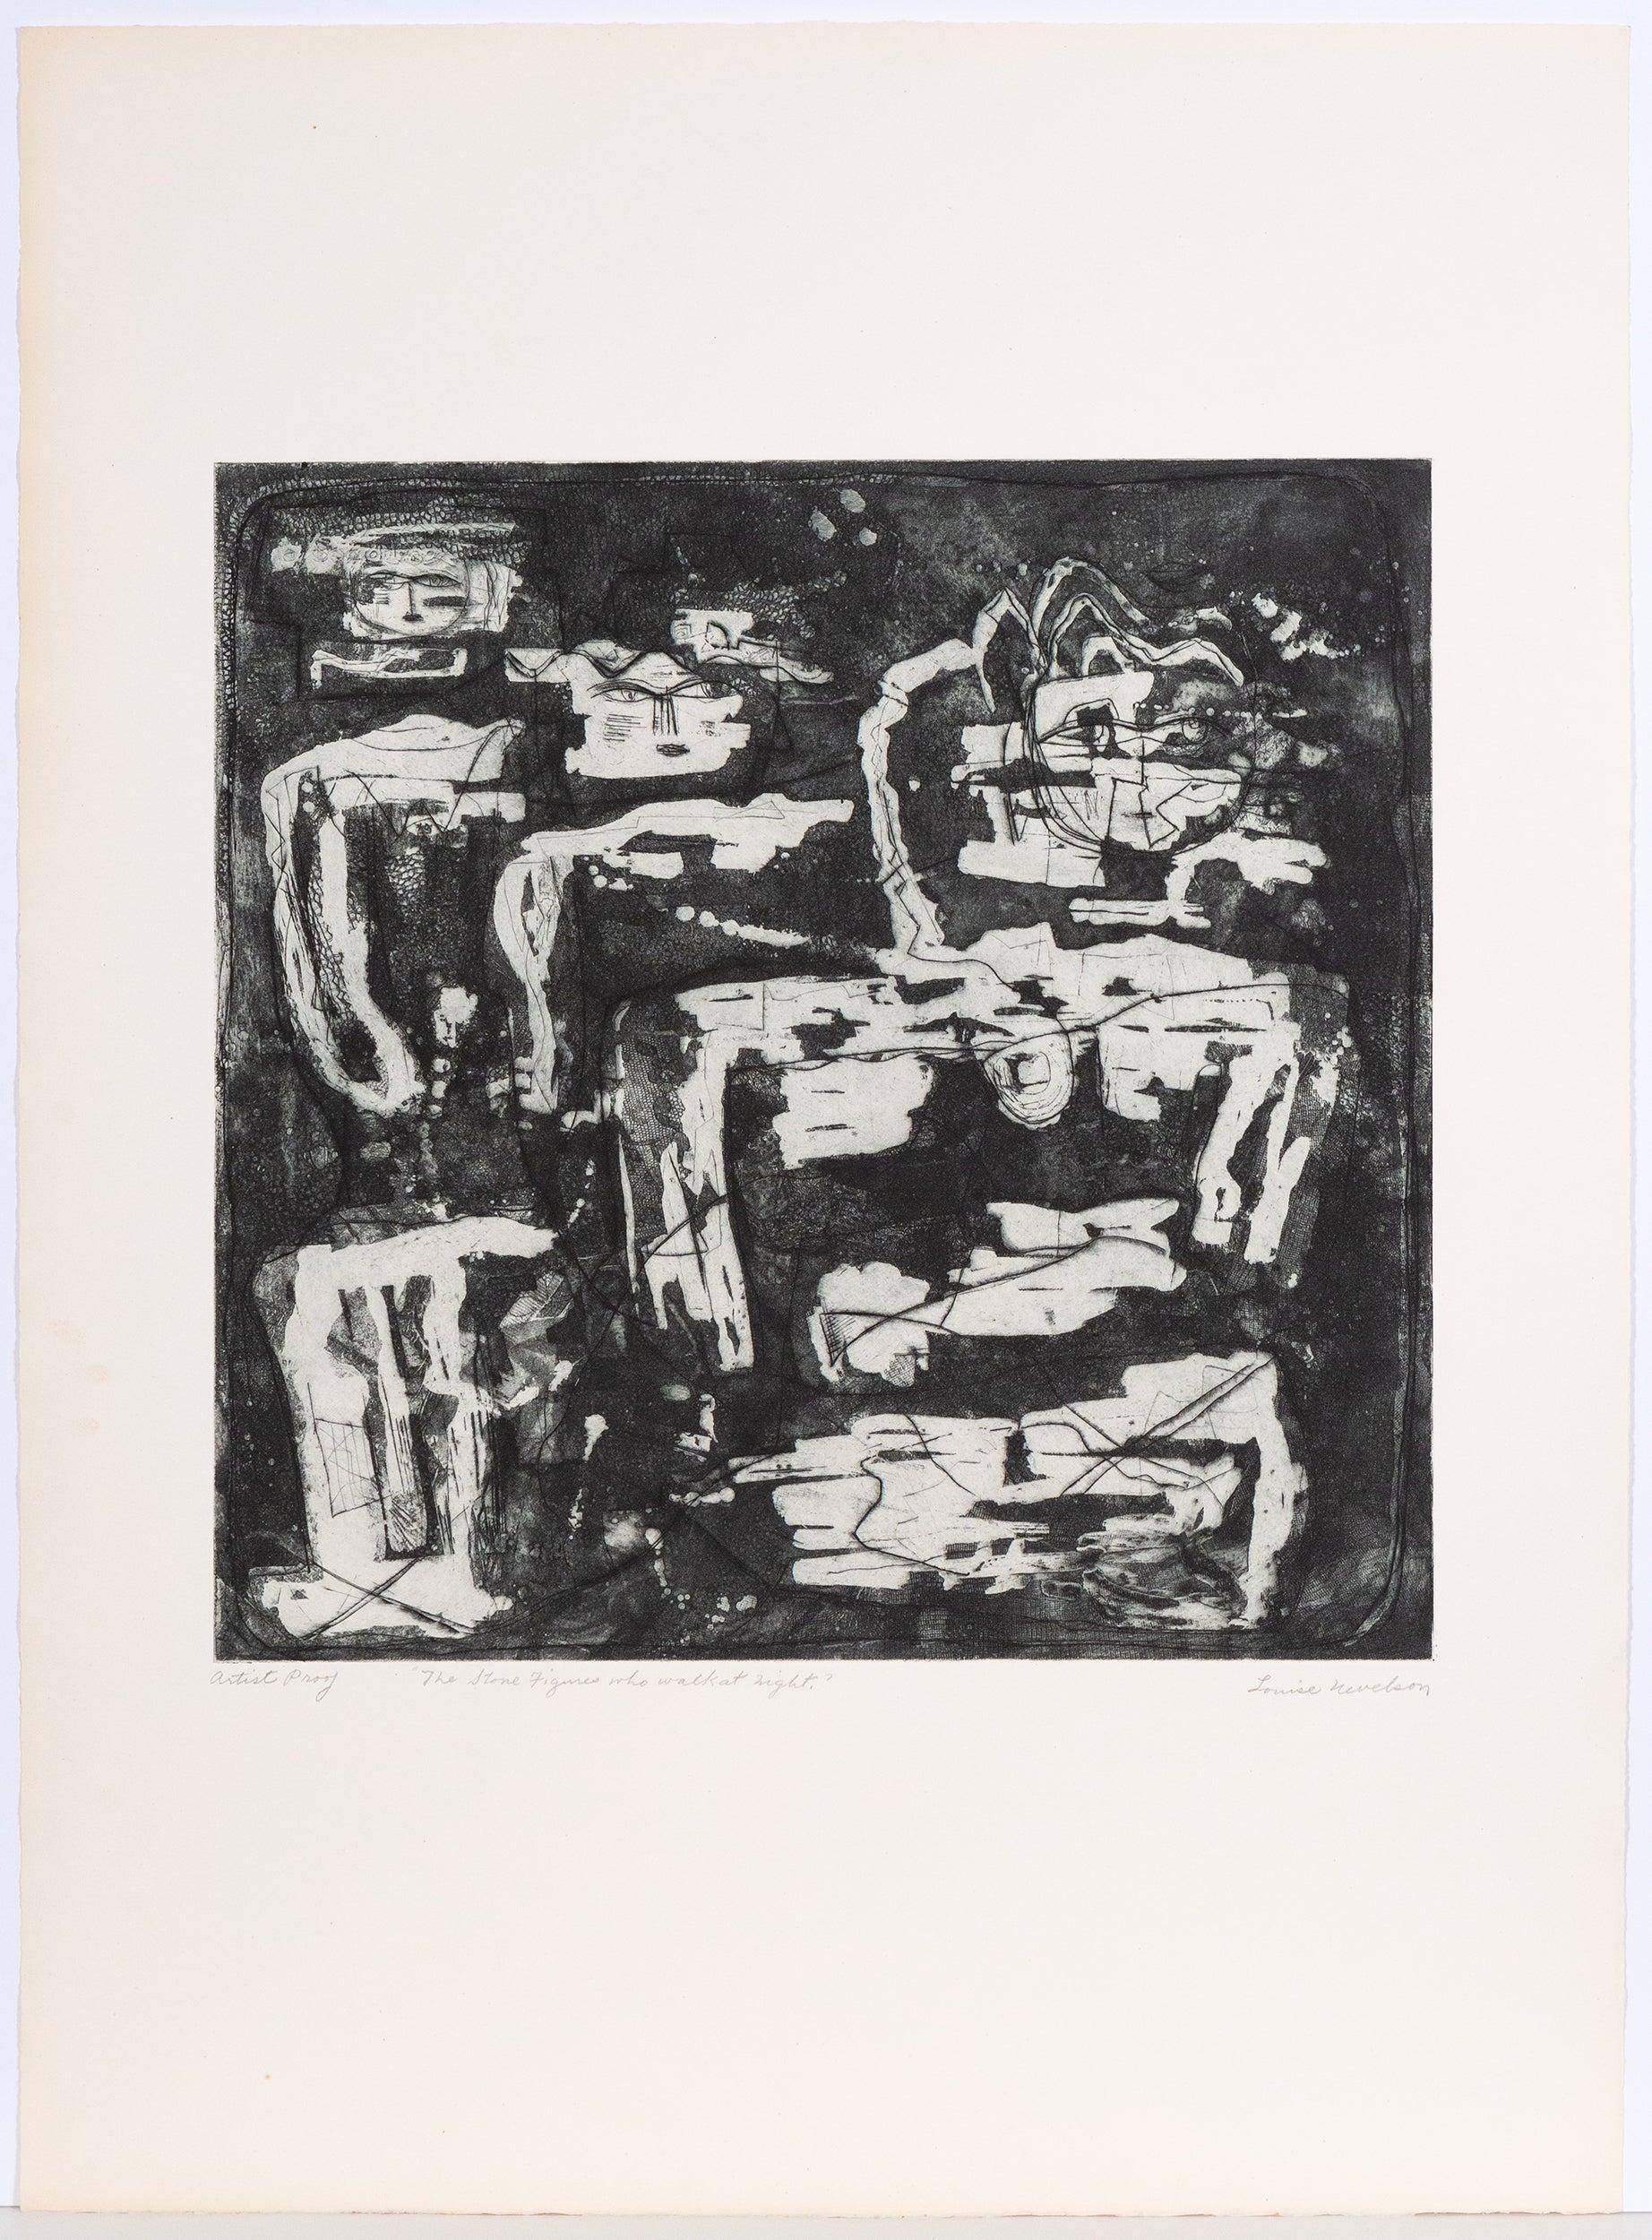 The Stone Figures That Walk At Night - Print by Louise Nevelson